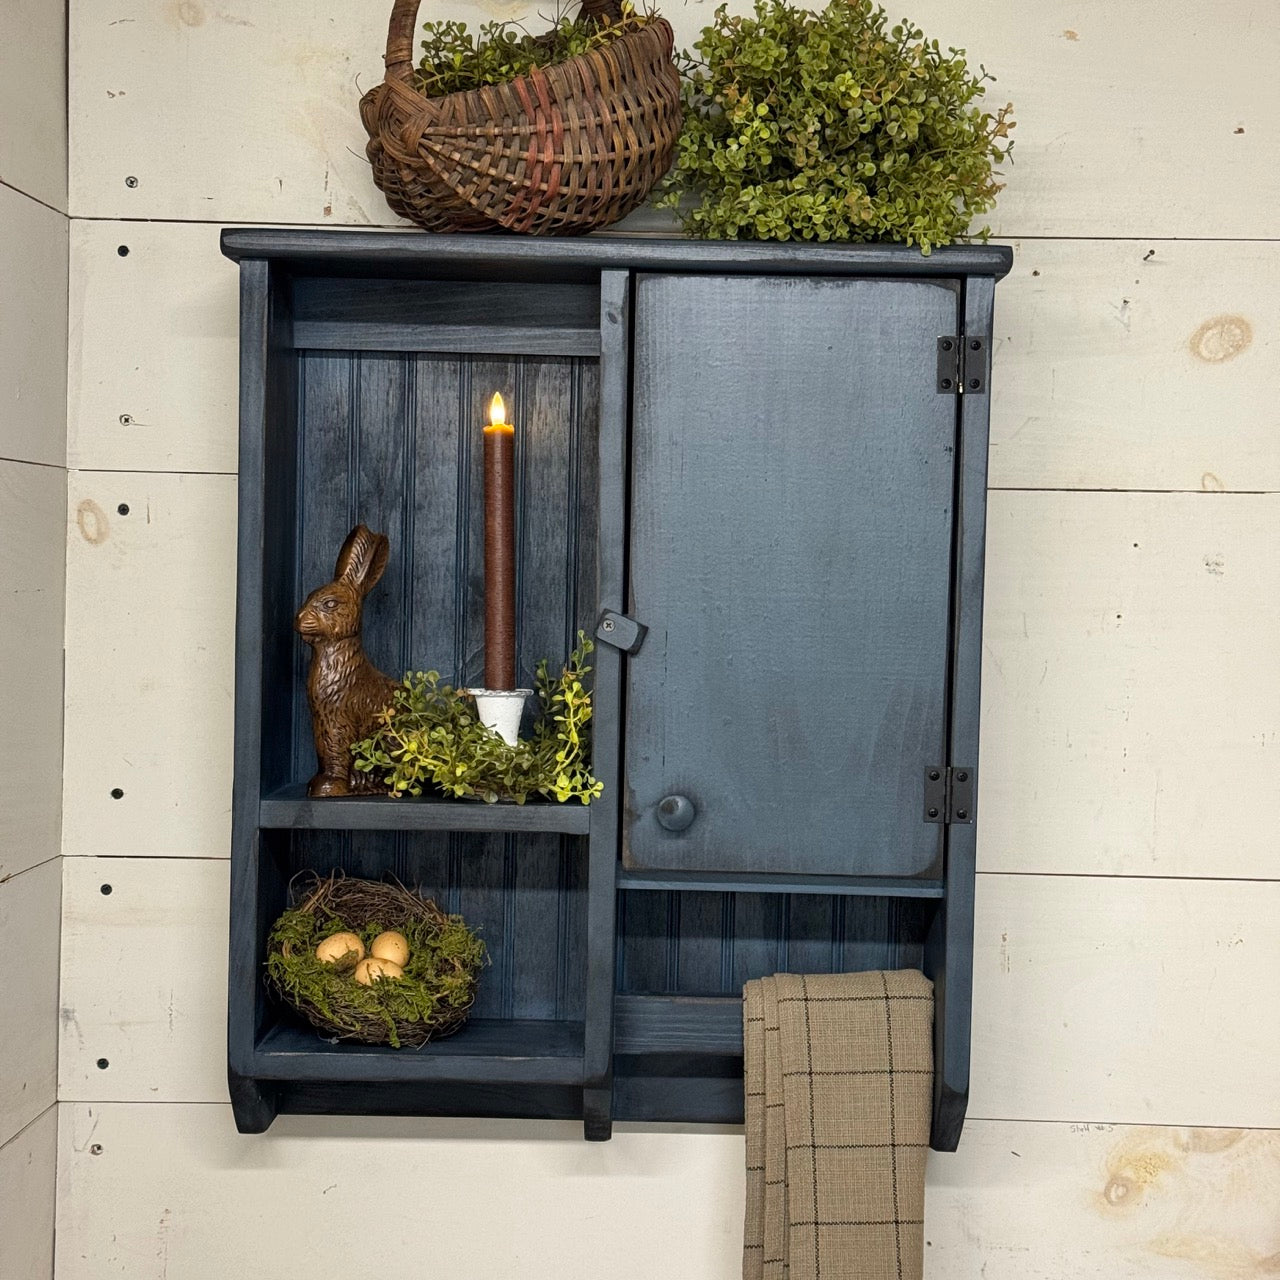 Hanging Wall Cabinet